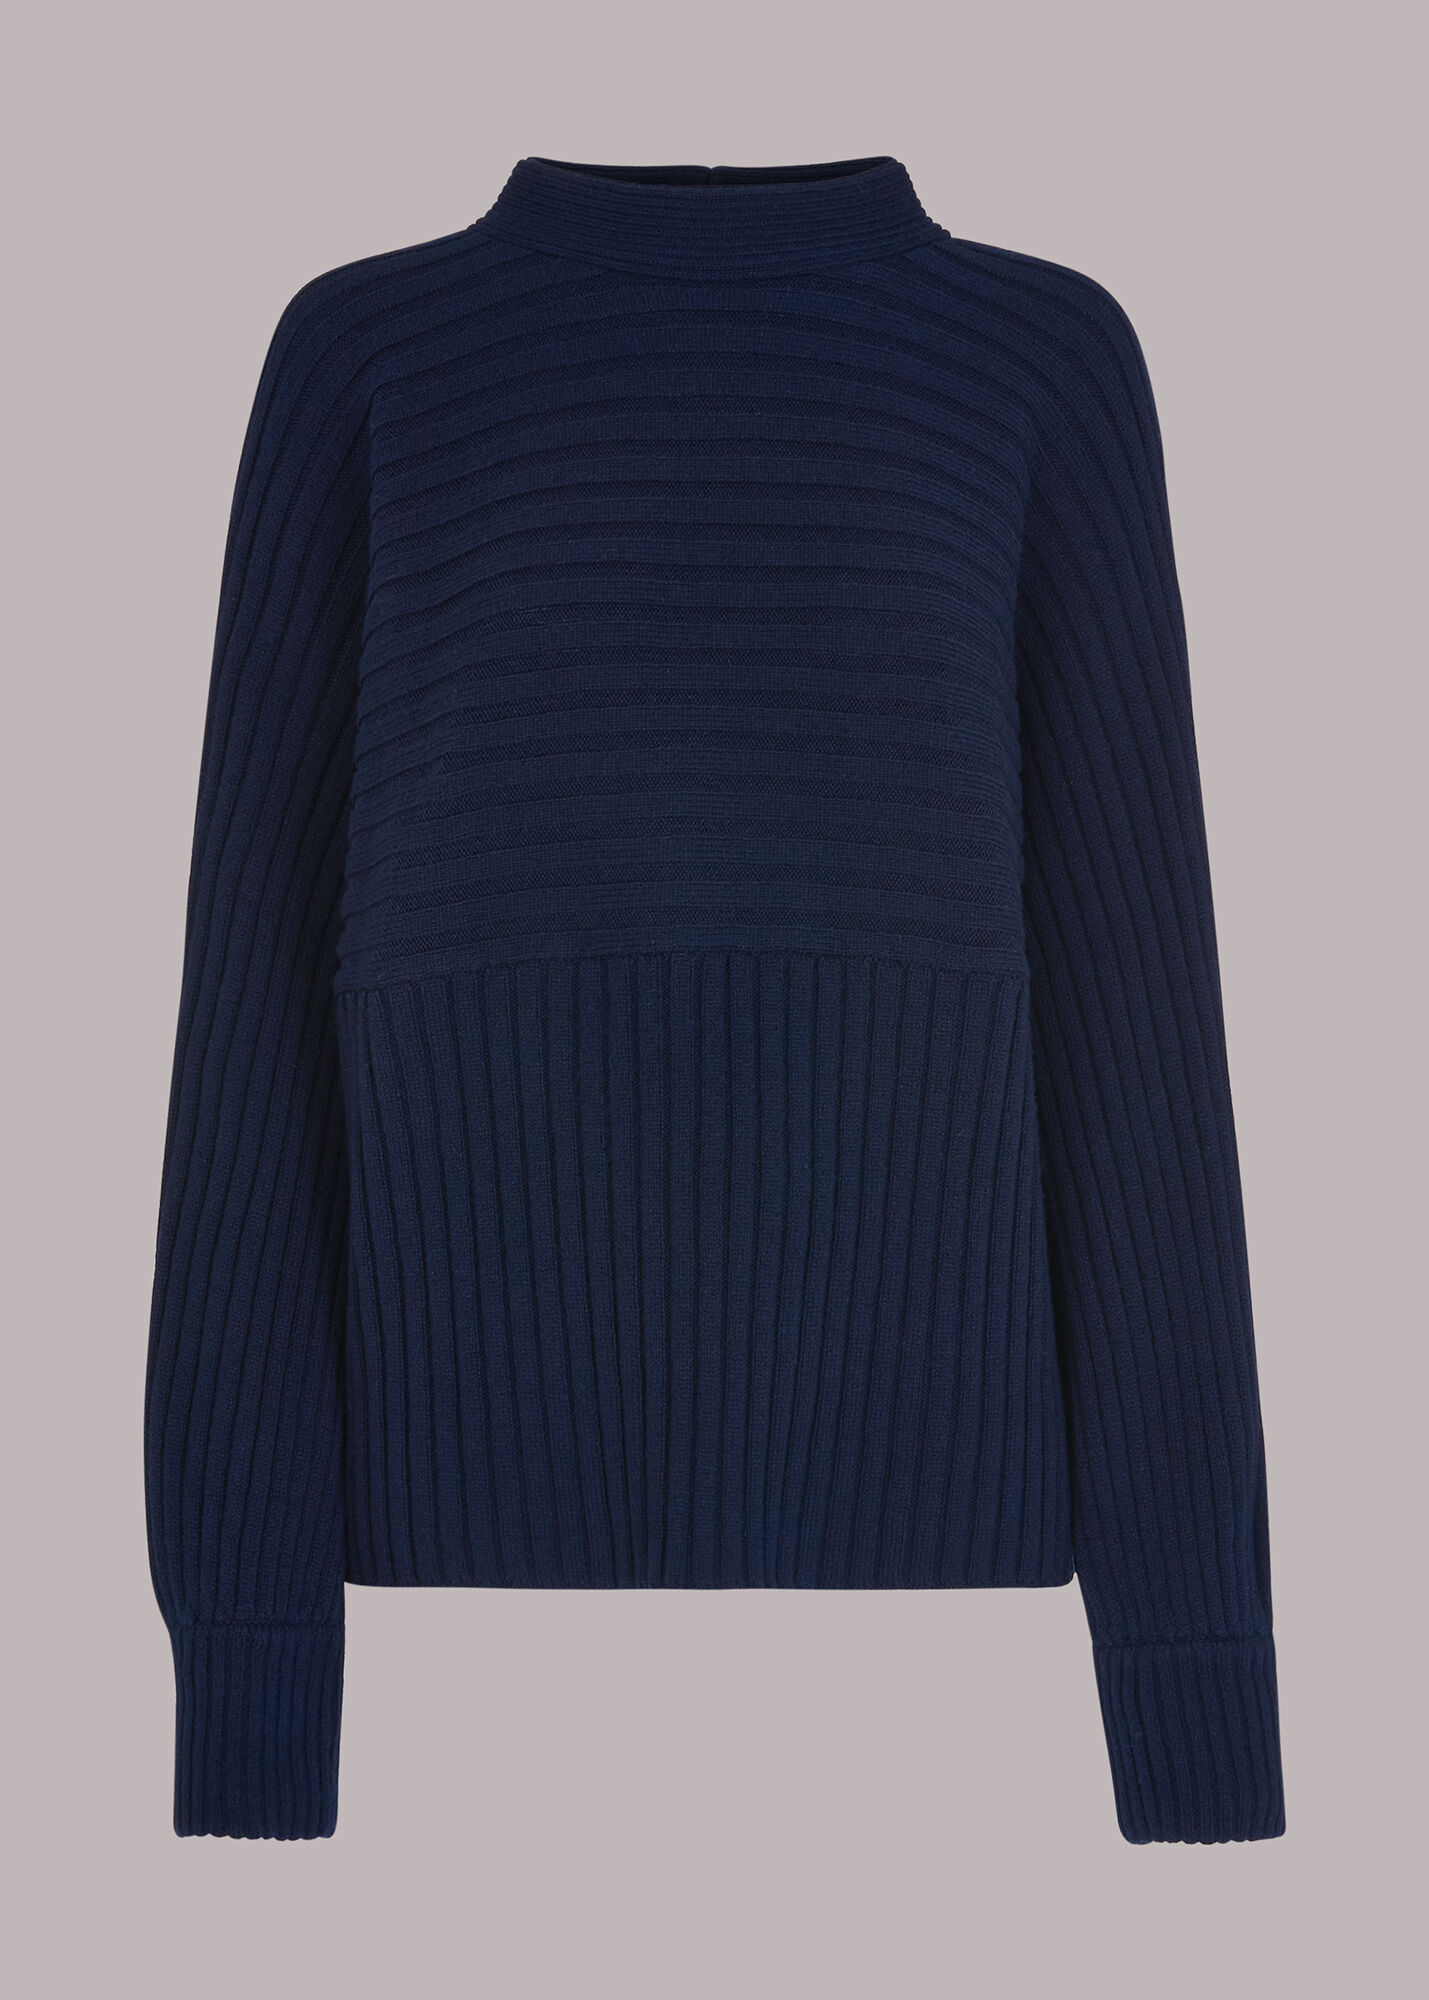 Navy Contrasting Rib Funnel Neck | WHISTLES